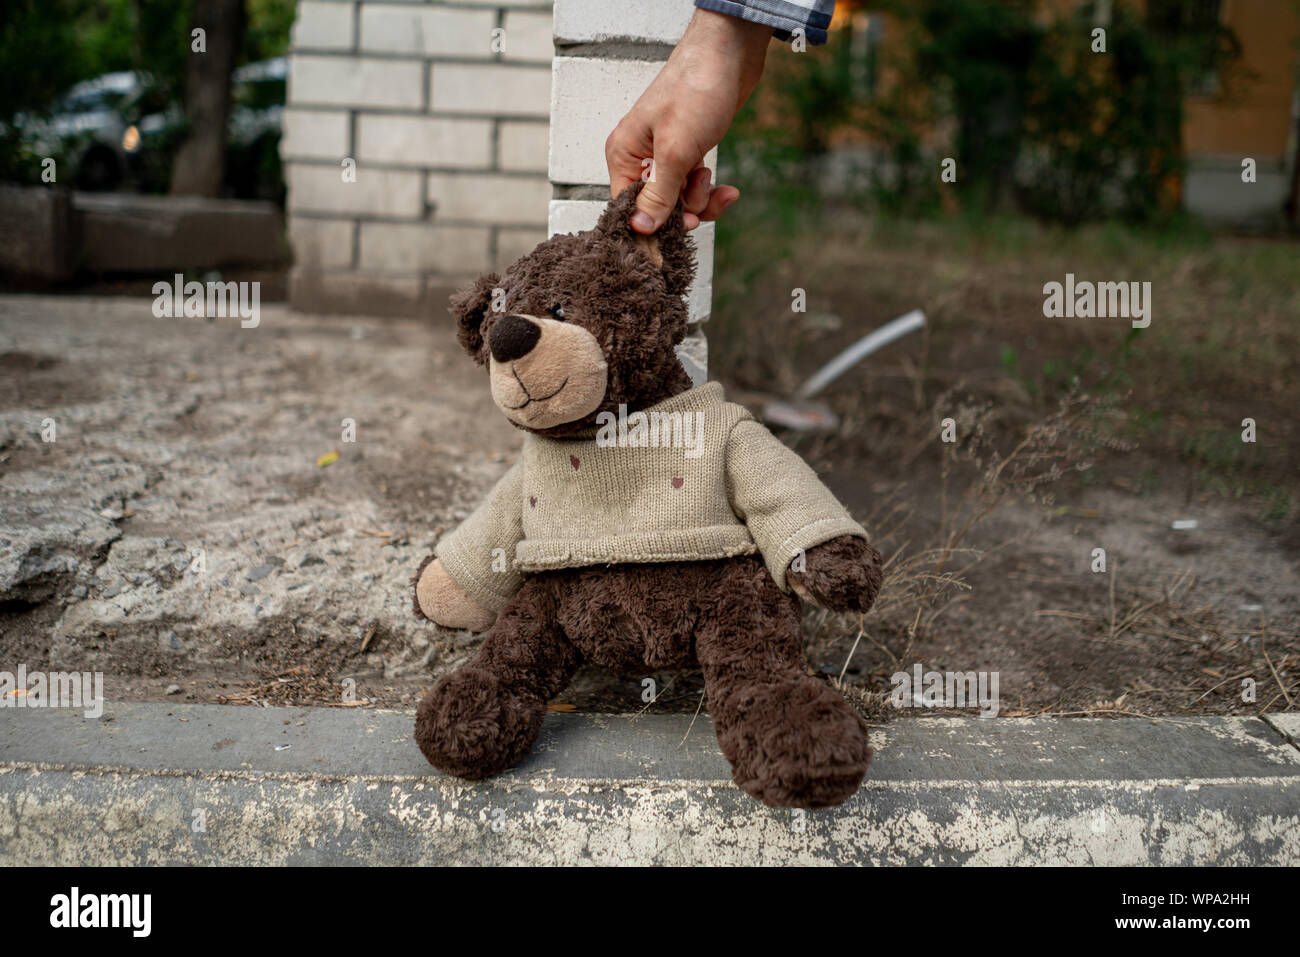 human hand grab the dirty teddy bear from the ground outdoors, lost concepts Stock Photo